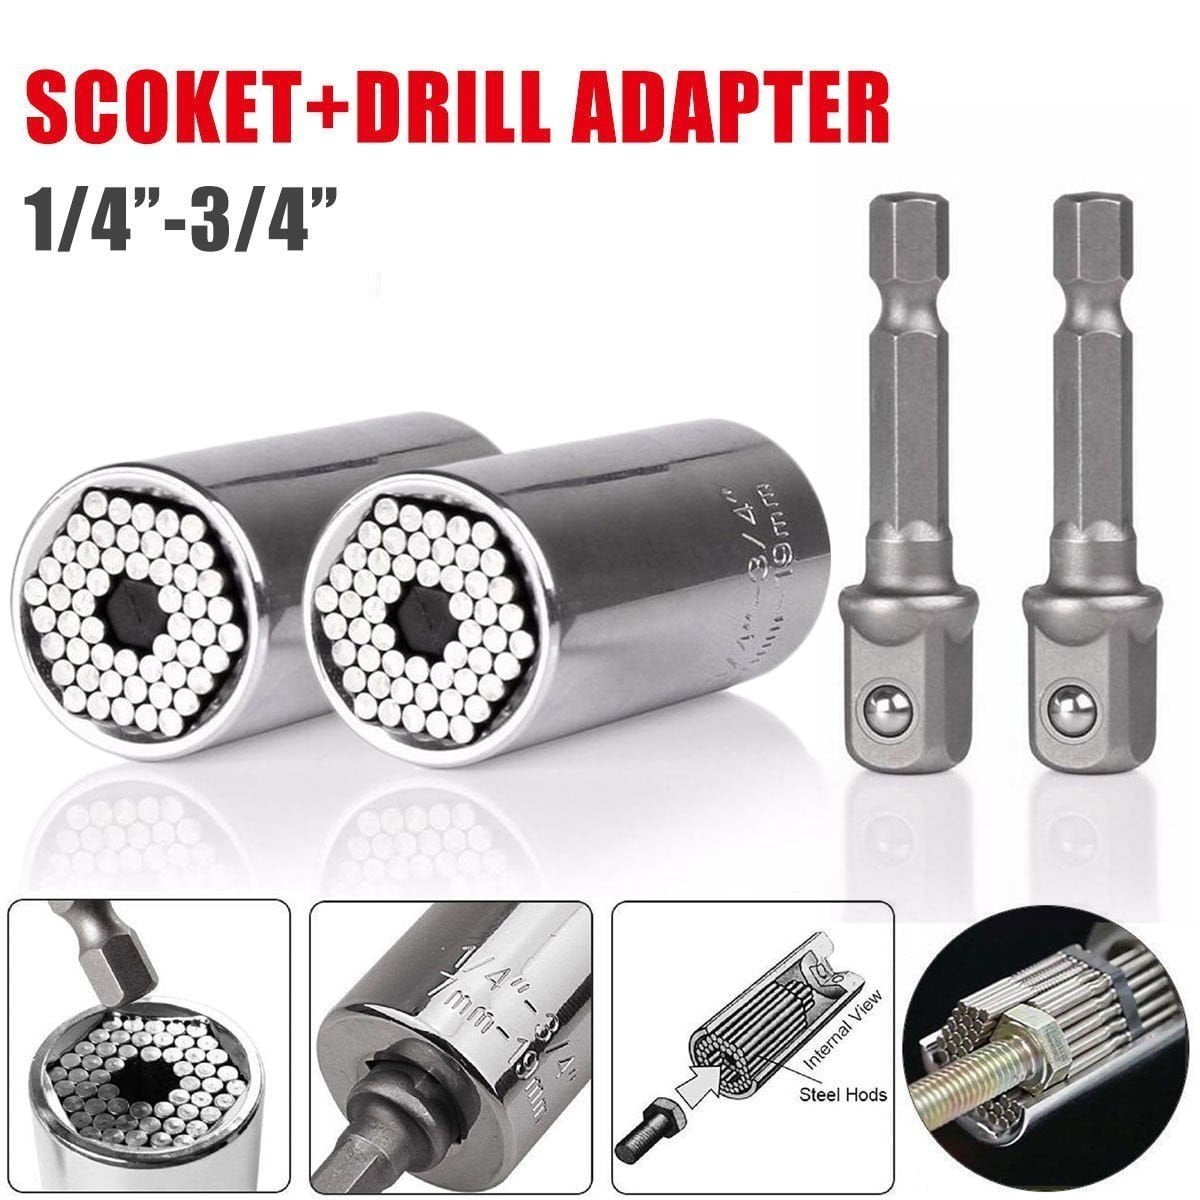 7mm-19mm Professional Repair Tools Gifts for Fathers Day Husband DIY Handyman Universal Socket Grip Adapter Universal Repair Tools Socket Set Ratchet Wrench Power Drill Adapter 1/4-3/4